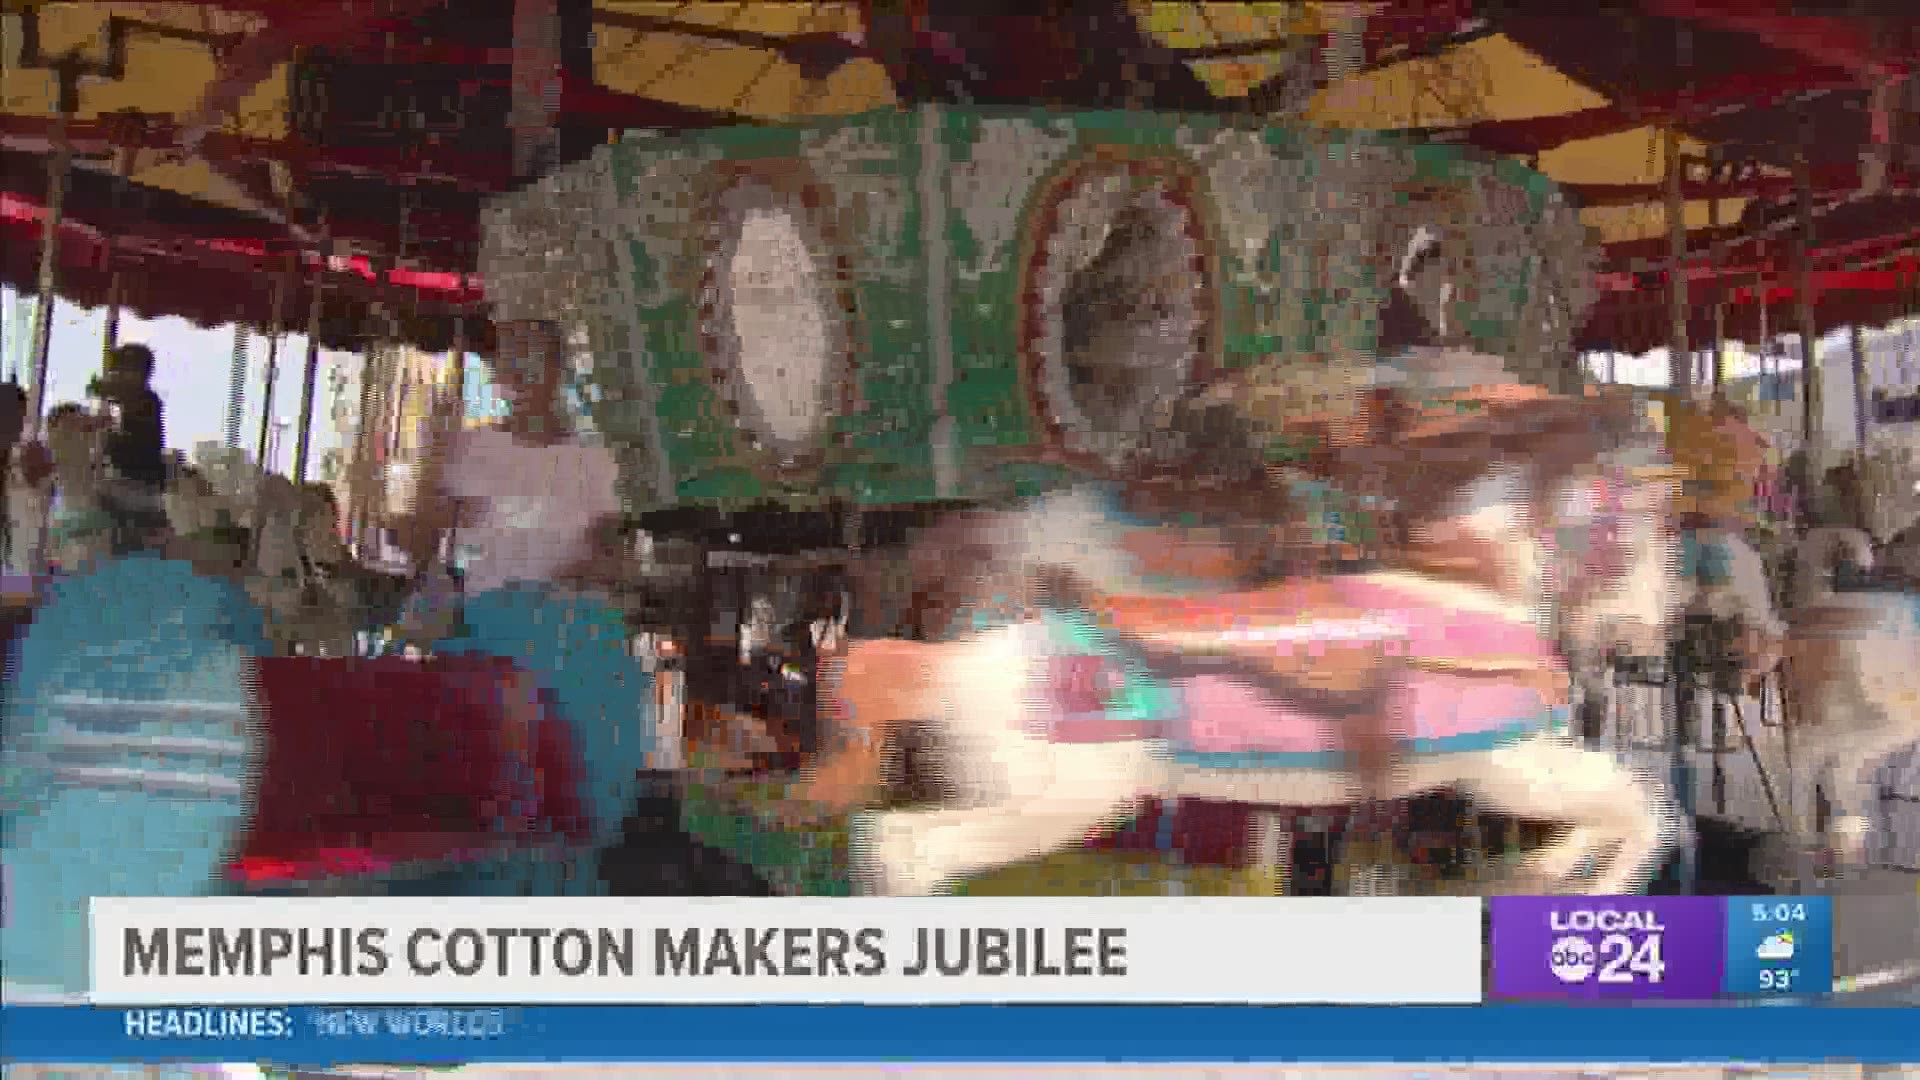 “We brought the carnival here to Whitehaven to let them know that Memphis Cotton Makers Jubilee understands revitalization, and we want to be a part of that.”